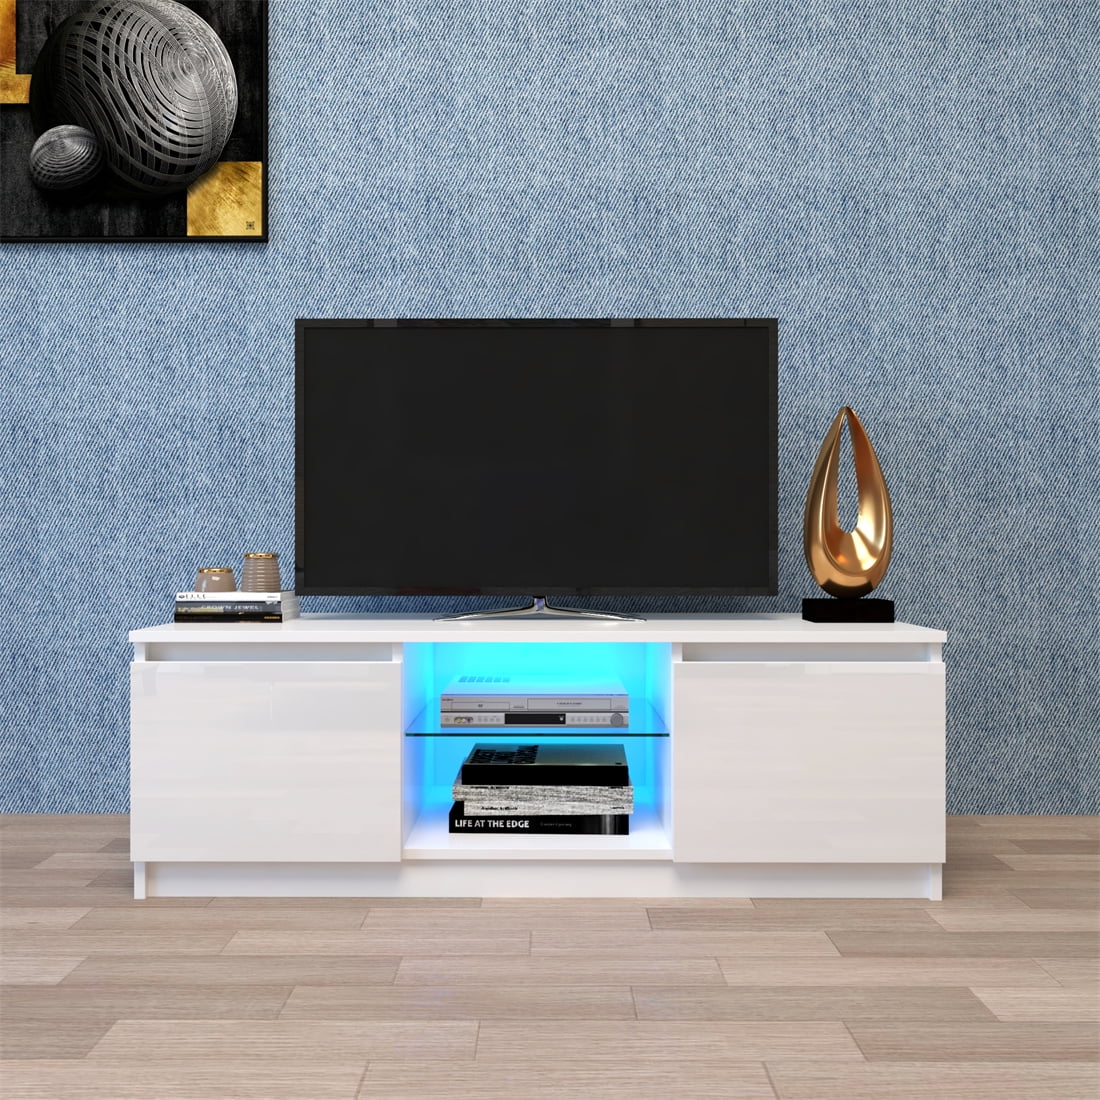 Details about   LED TV Cabinet Stand Storage Drawers Entertainment Center Media Console Table 